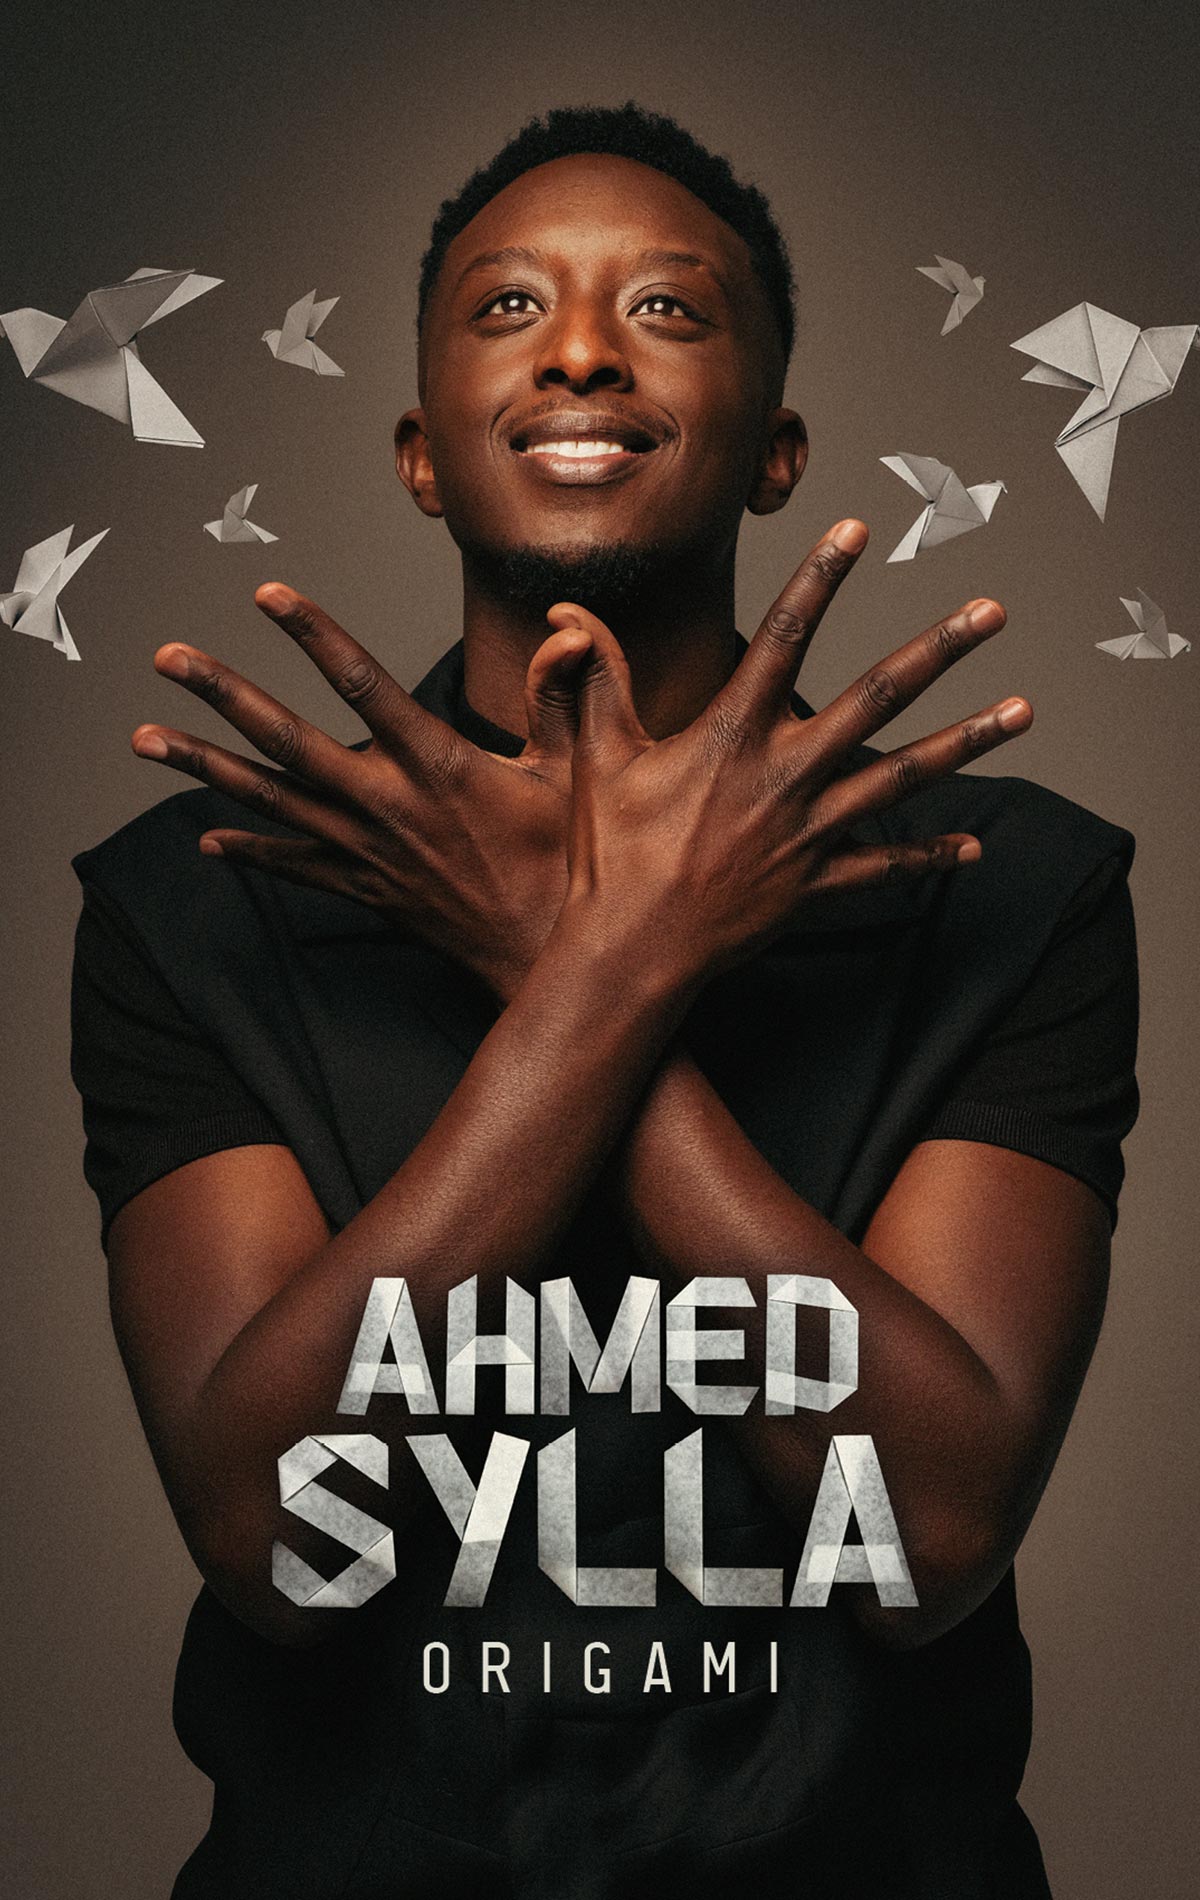 Ahmed Sylla at Zenith Toulouse Tickets